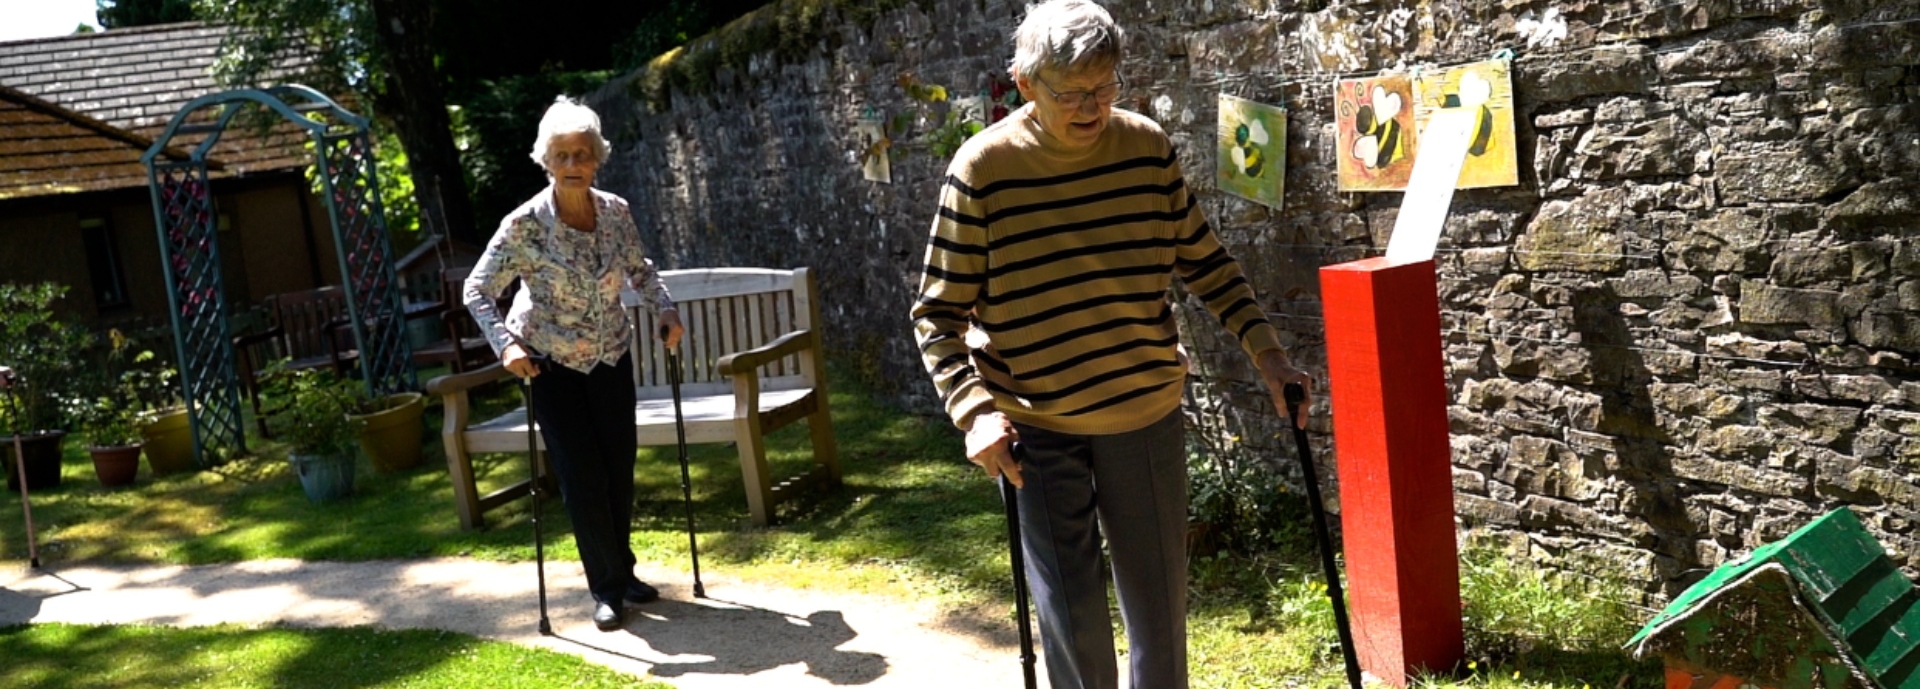 Care home residents exercising